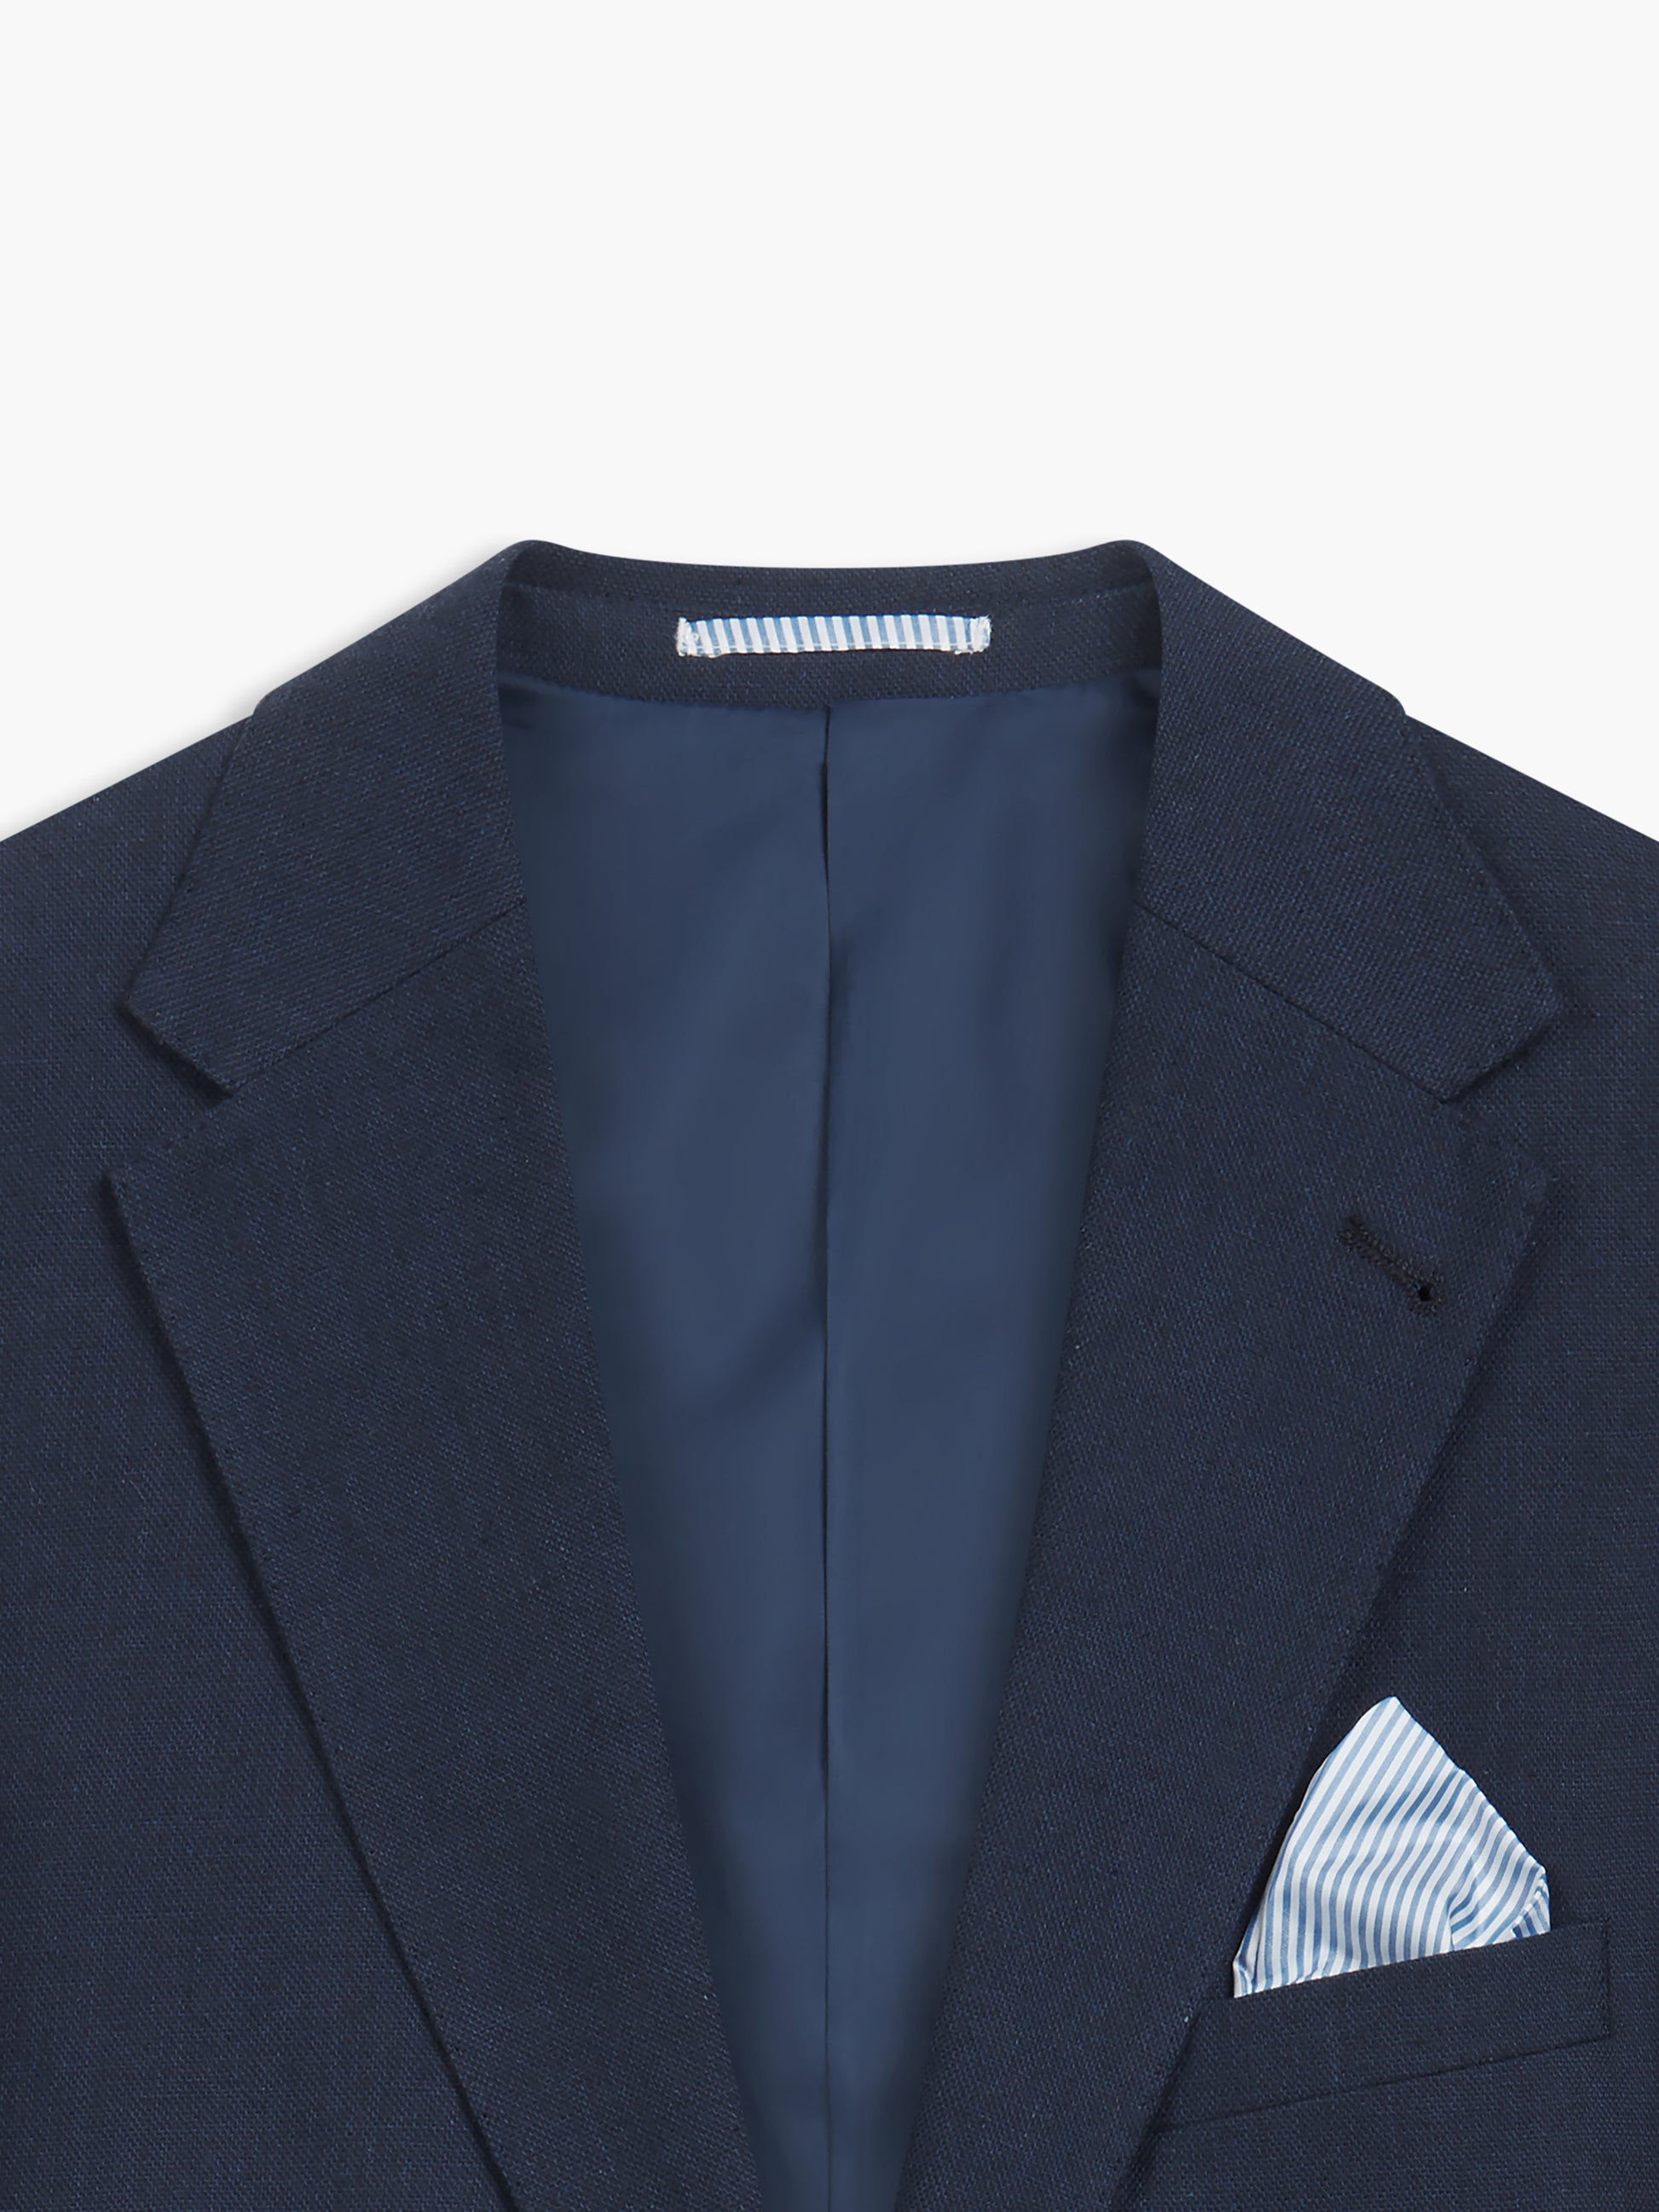 Image 8 of Slim Fit Single Breasted Linen Suit Jacket in Navy